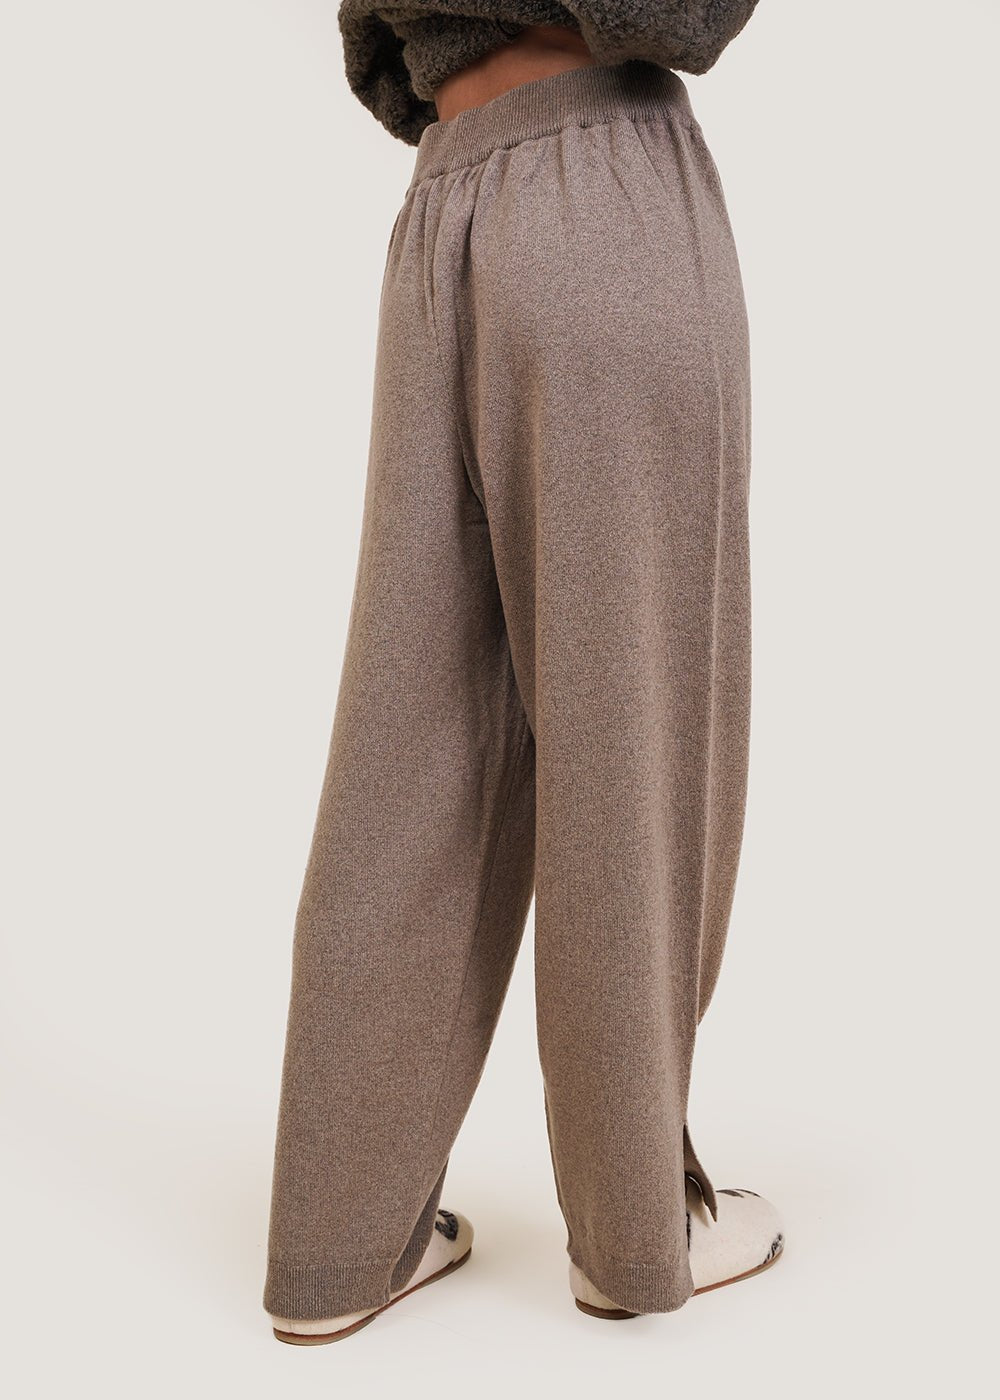 Cashmere Knit Pants in Taupe by CORDERA – New Classics Studios